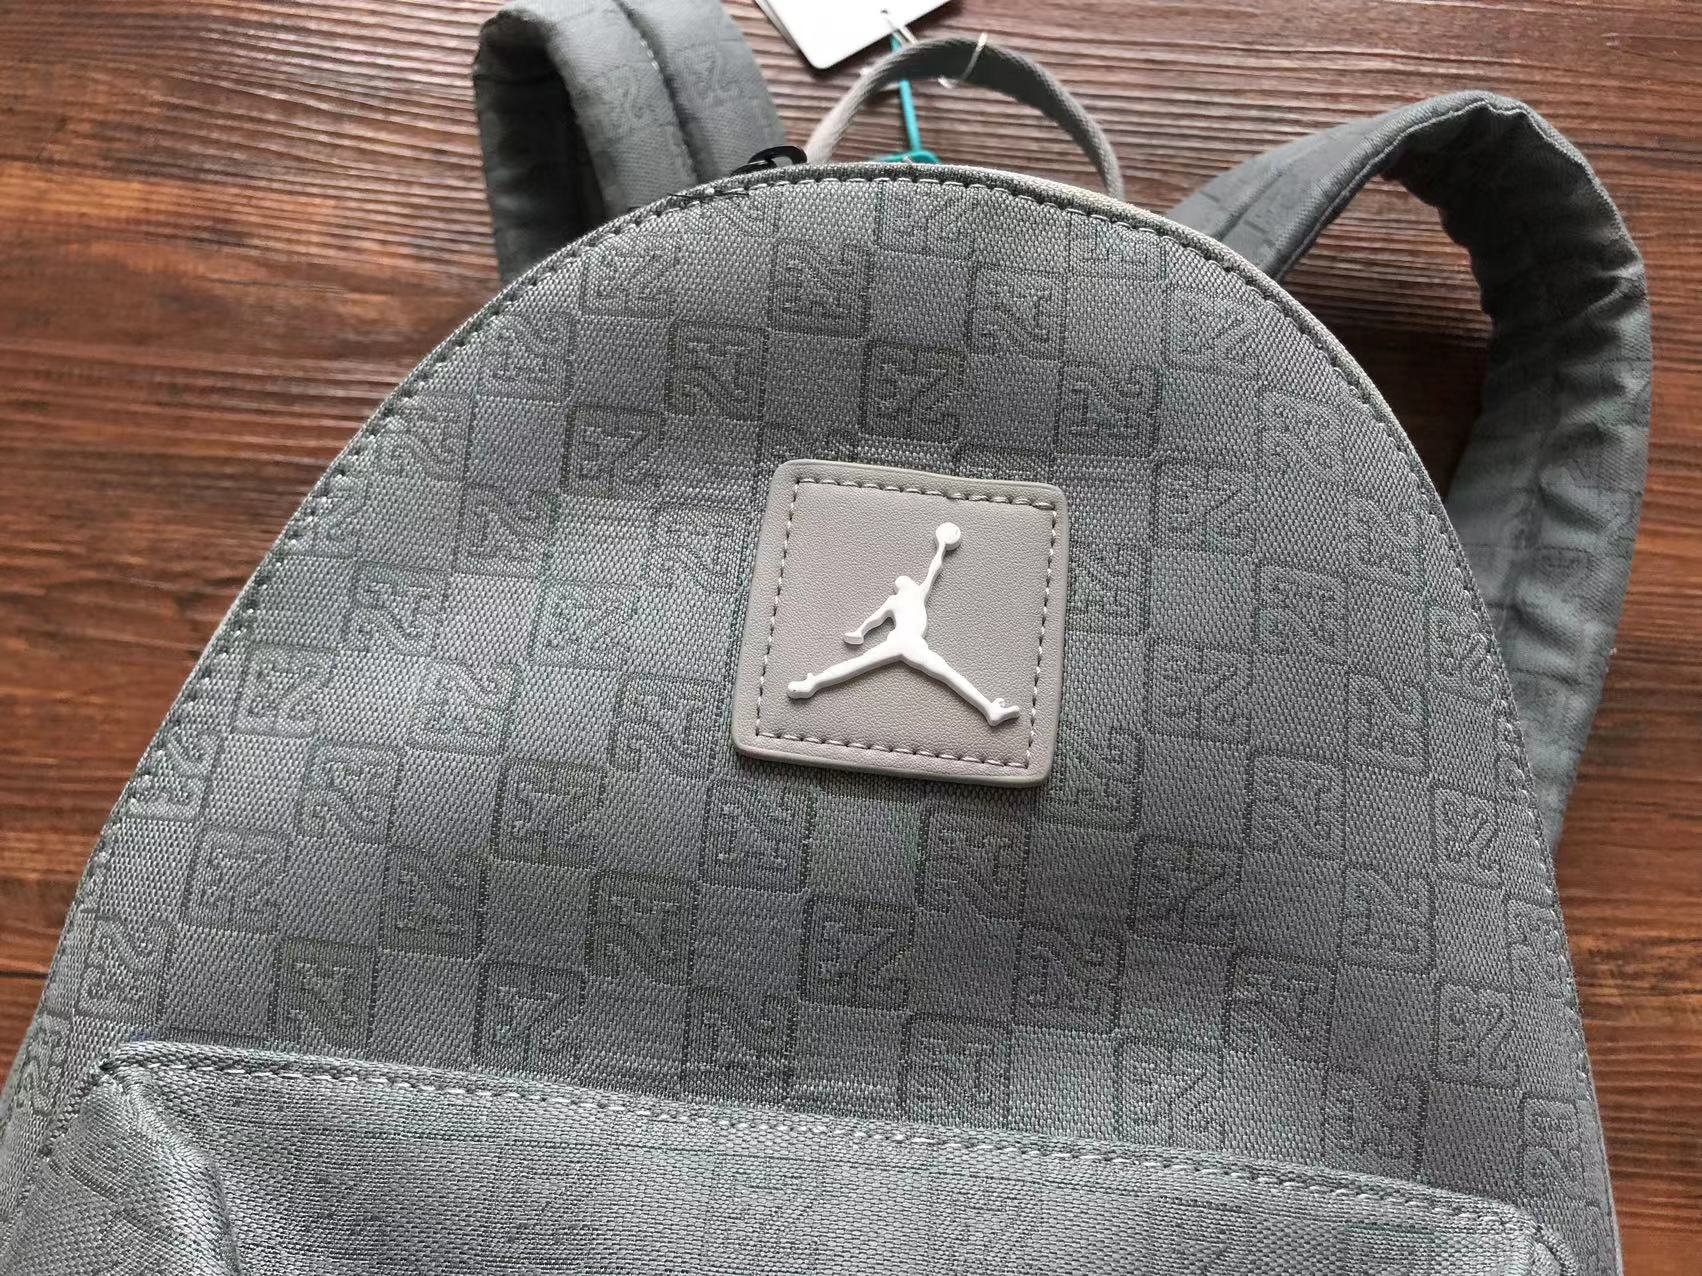 Discover the essence of style with the Jordan Monogram Backpack Bag